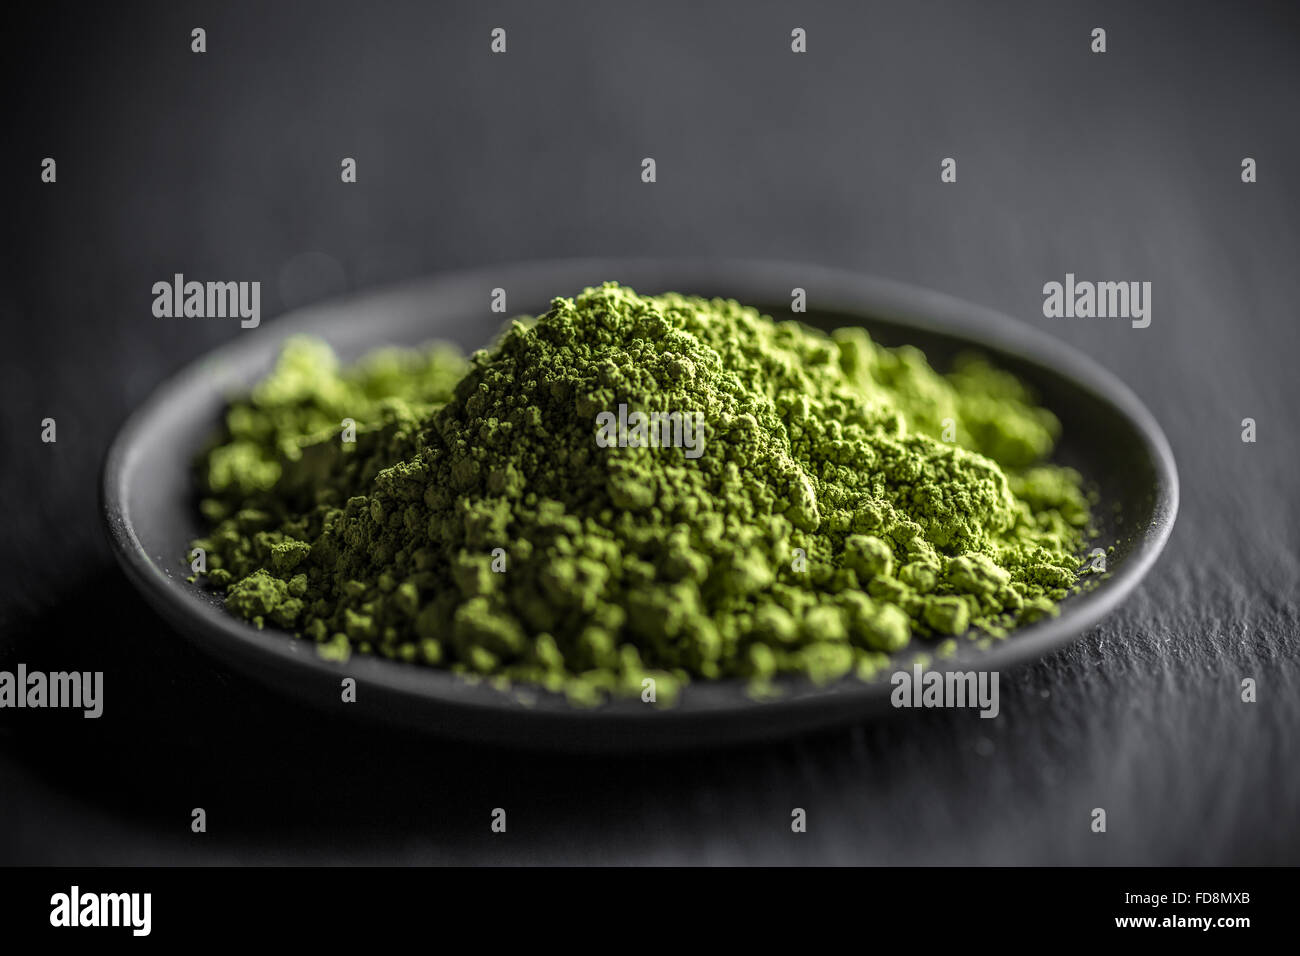 Macha green powder in a plate on black background Stock Photo